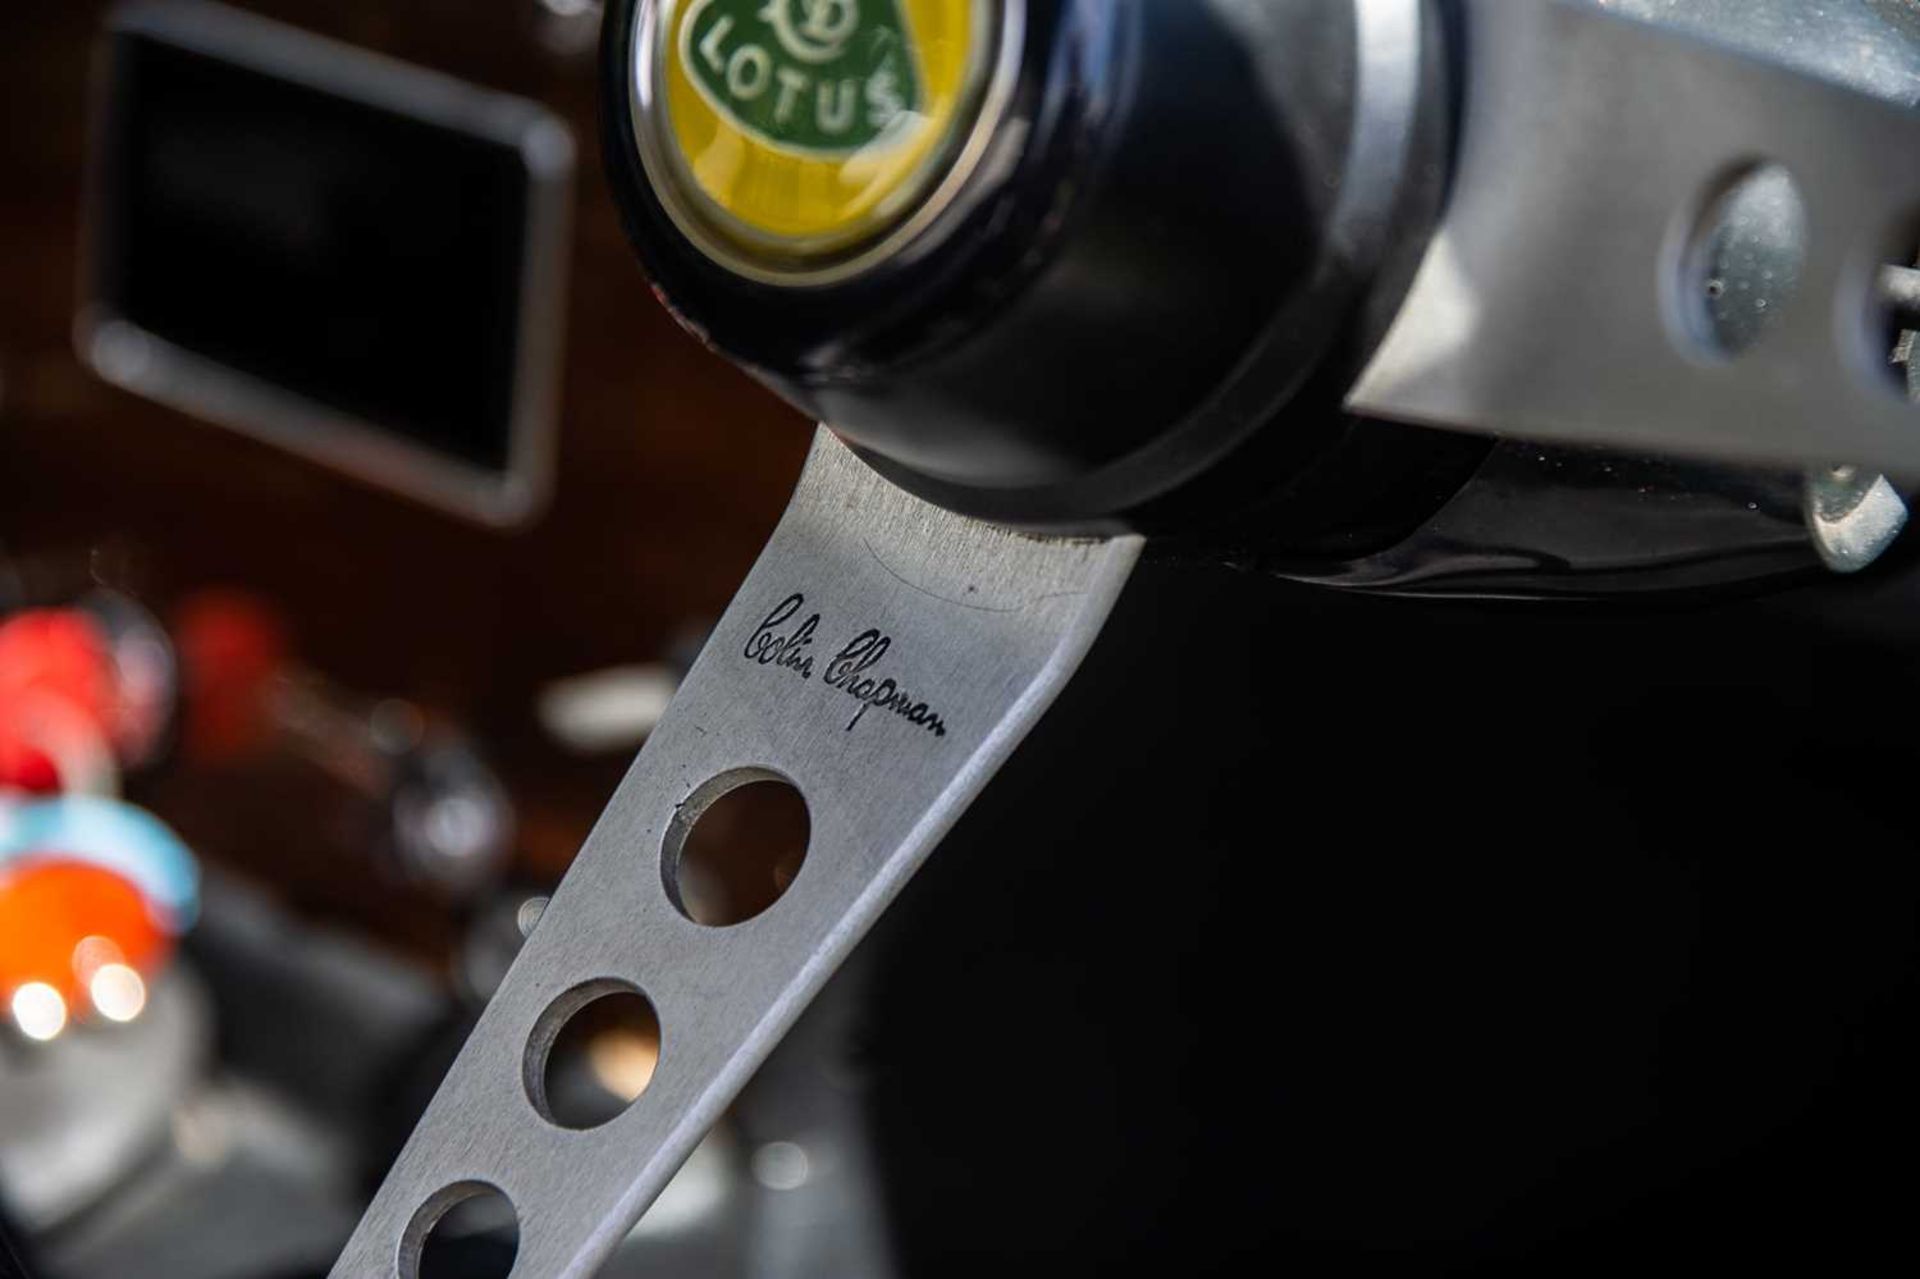 1966 Lotus Elan Fixed Head Coupe Sympathetically restored, equipped with desirable upgrades - Image 32 of 100